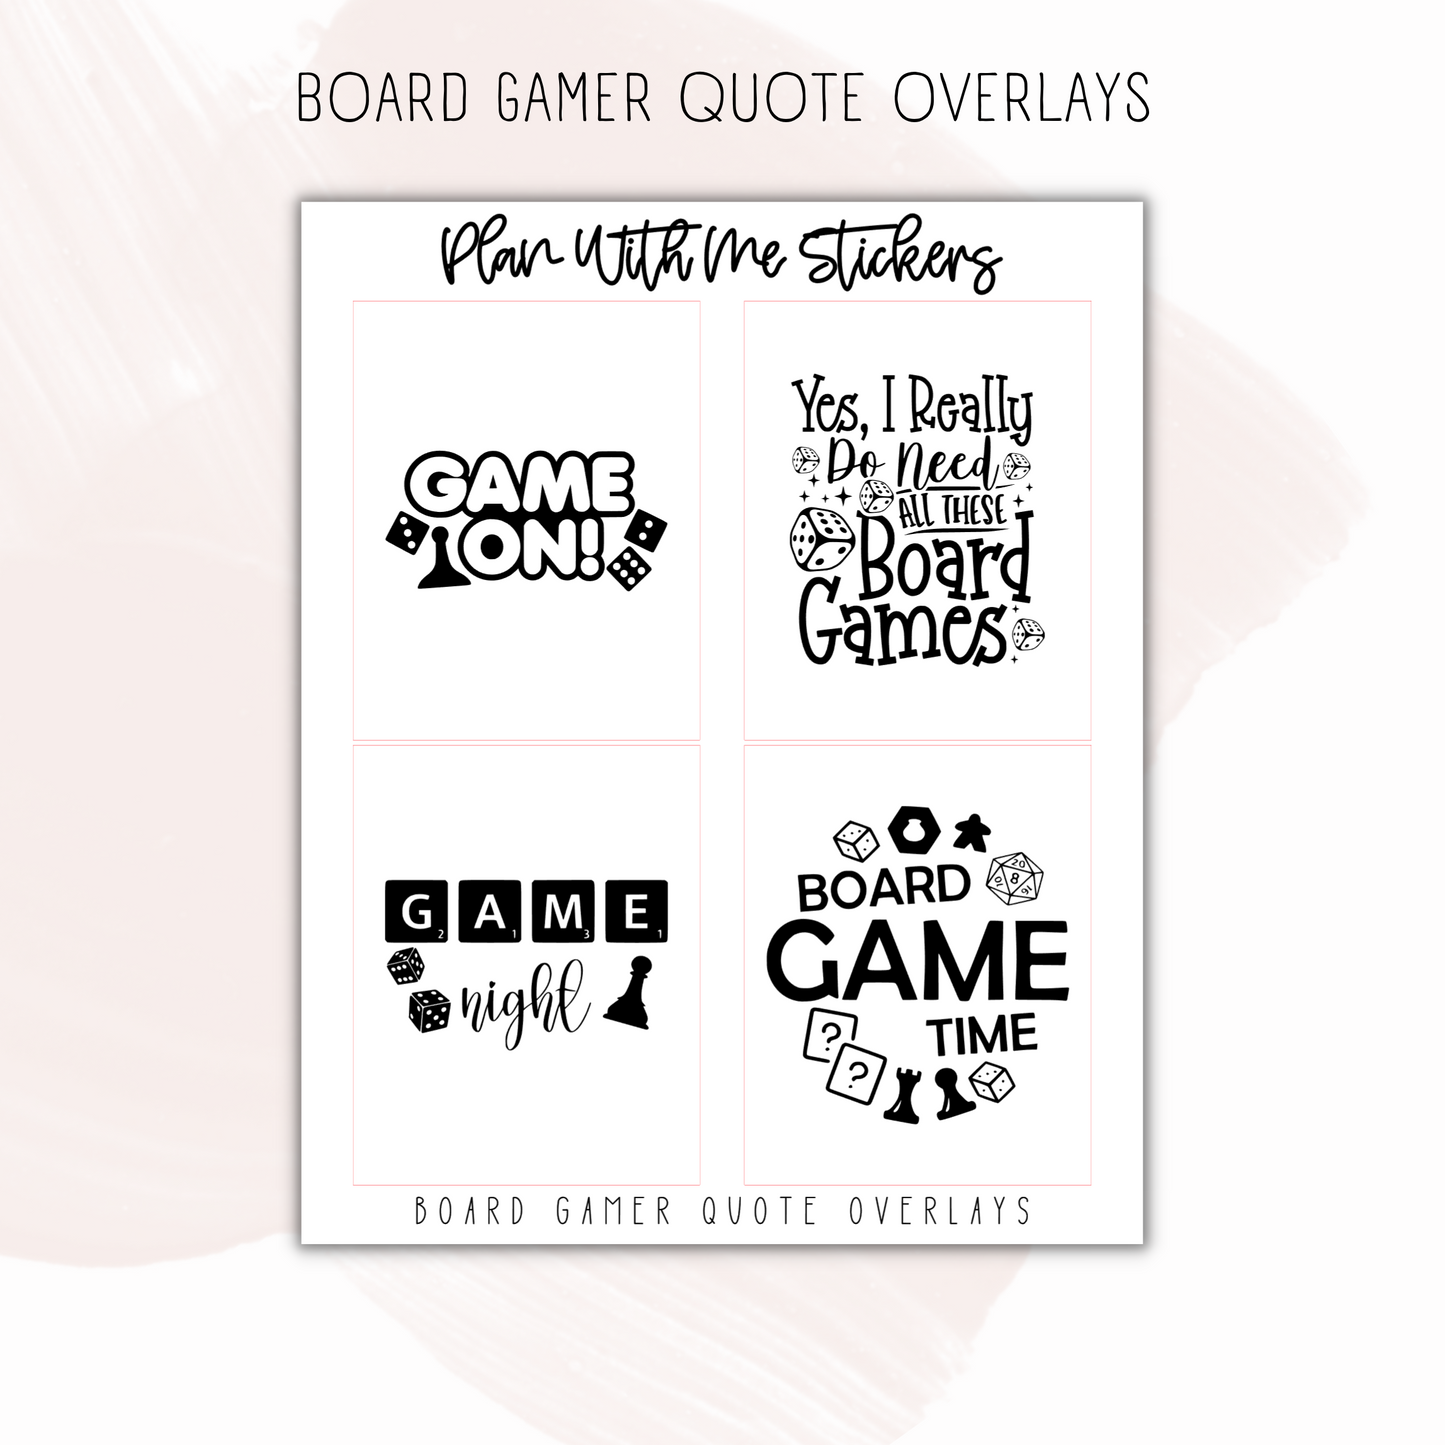 Board Gamer Quote Overlays